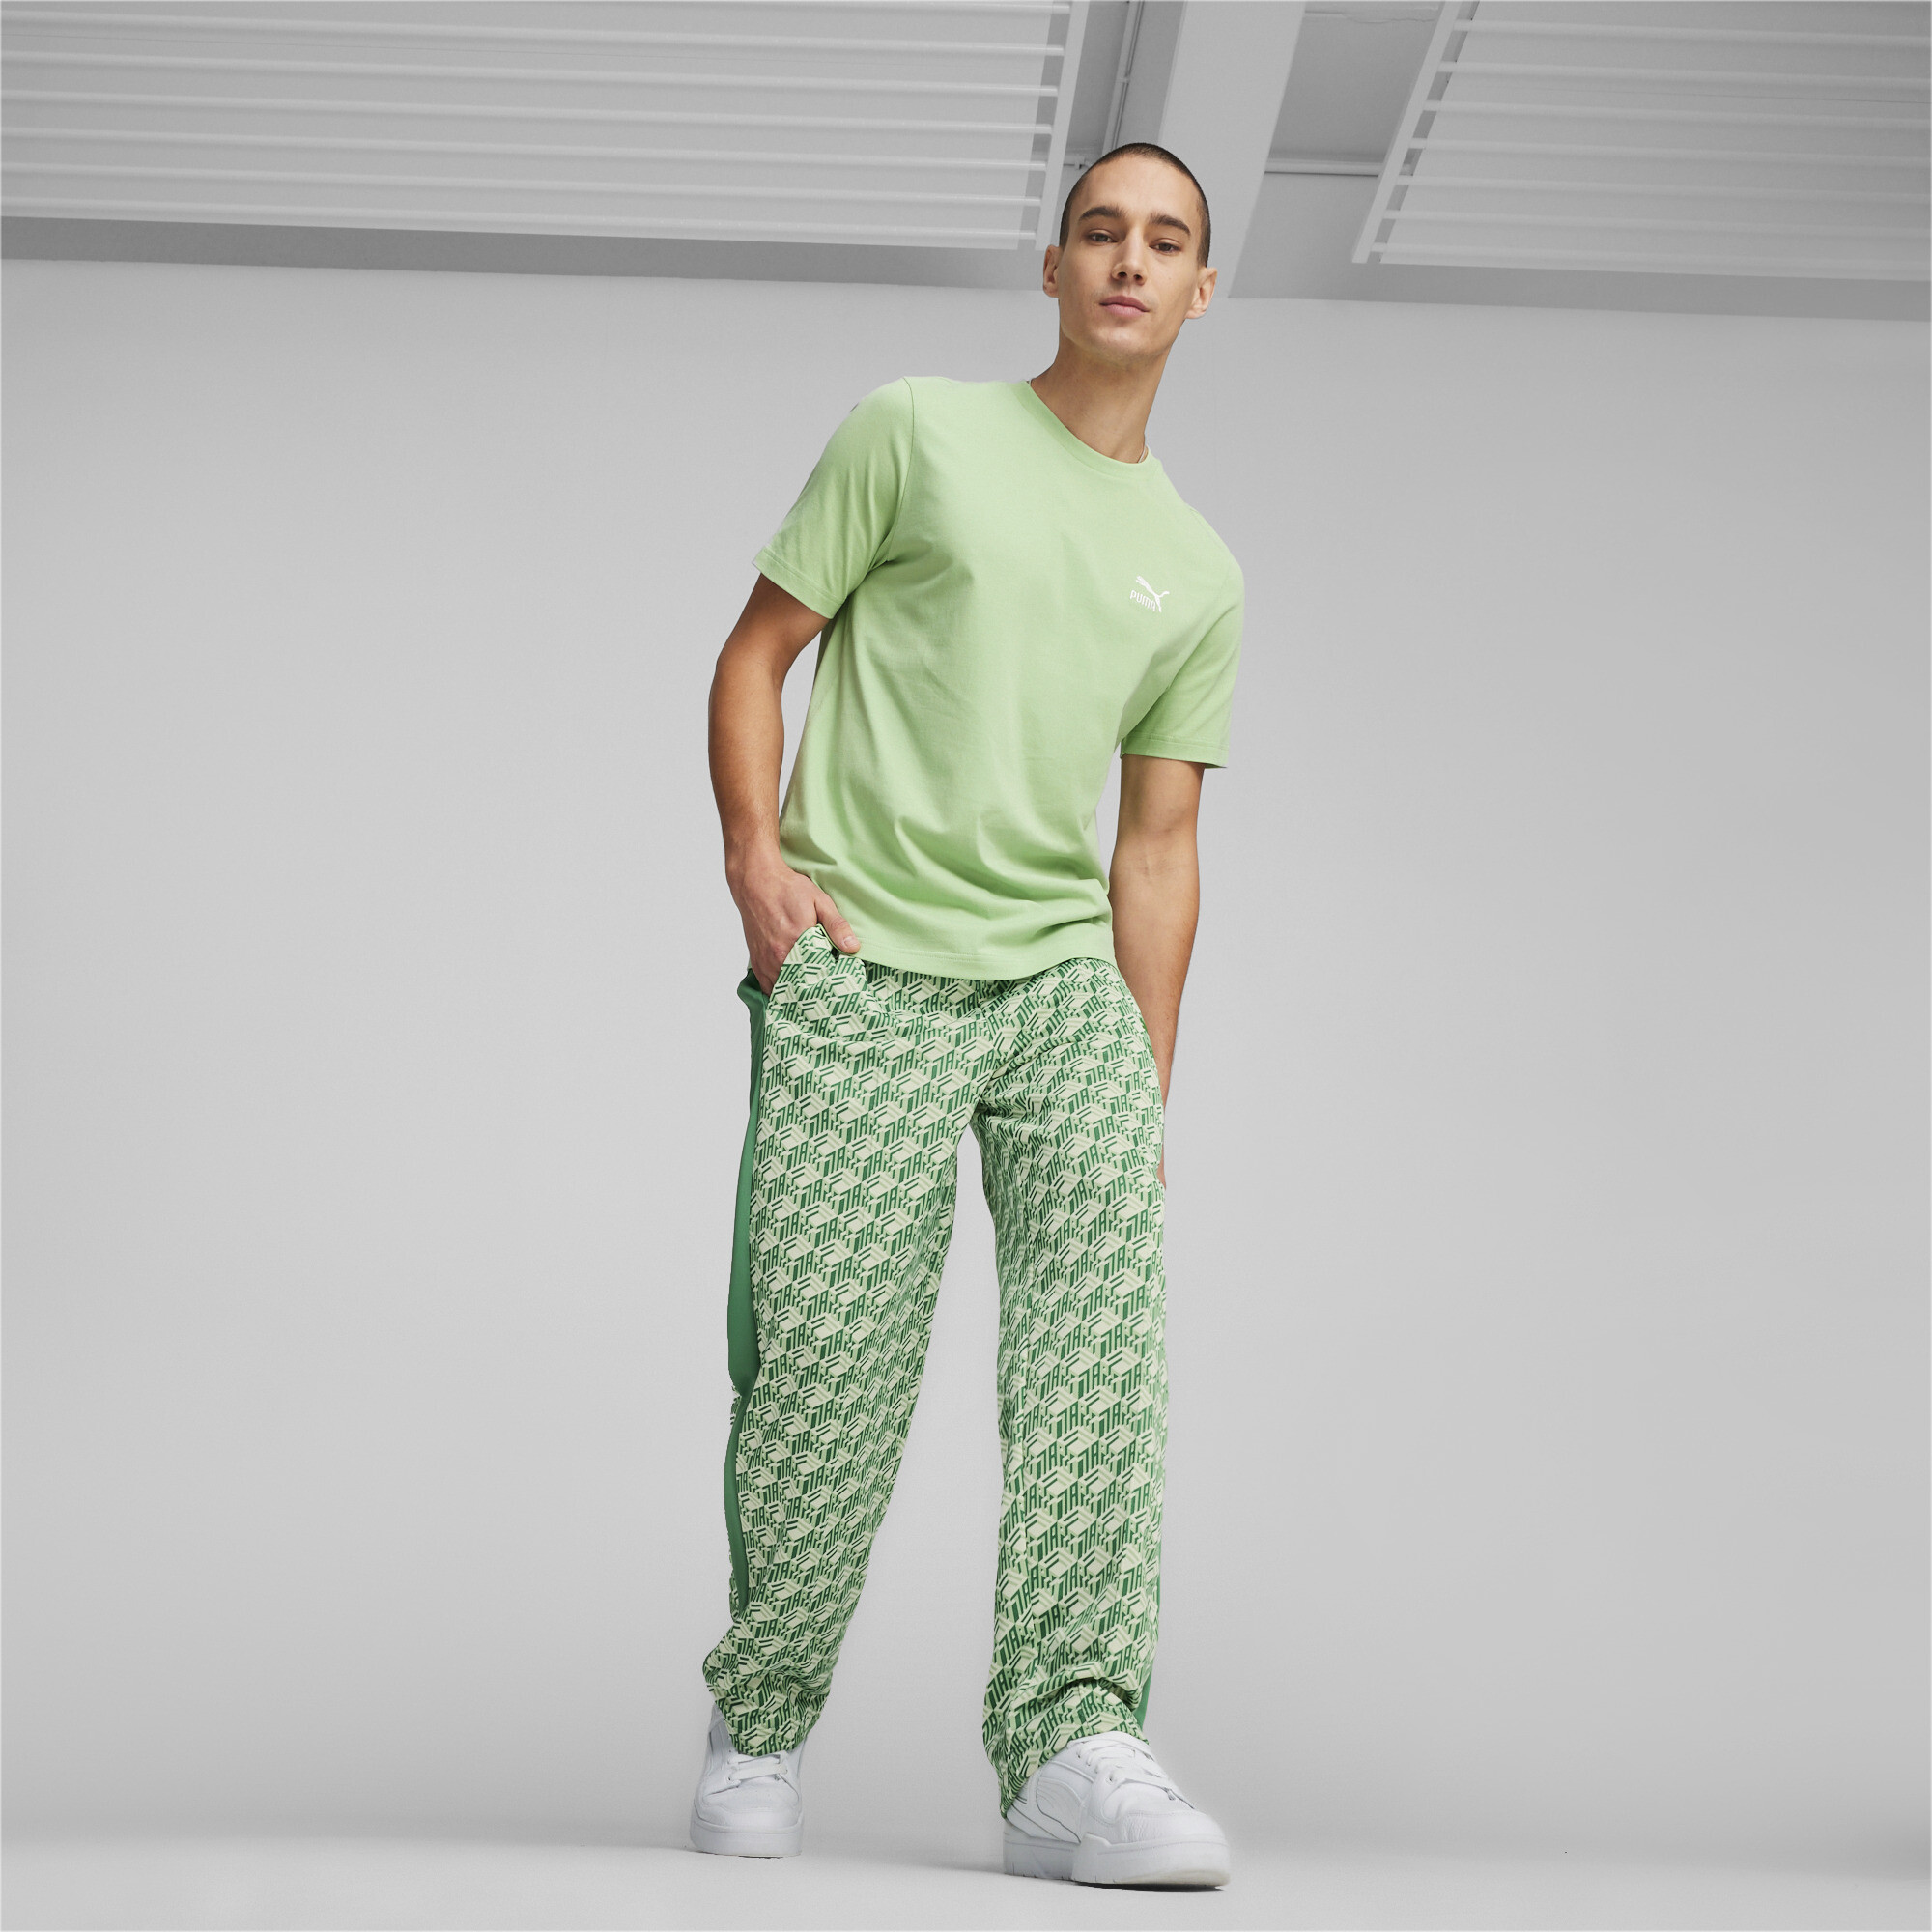 Men's PUMA T7 Straight Track Pants In Green, Size XS